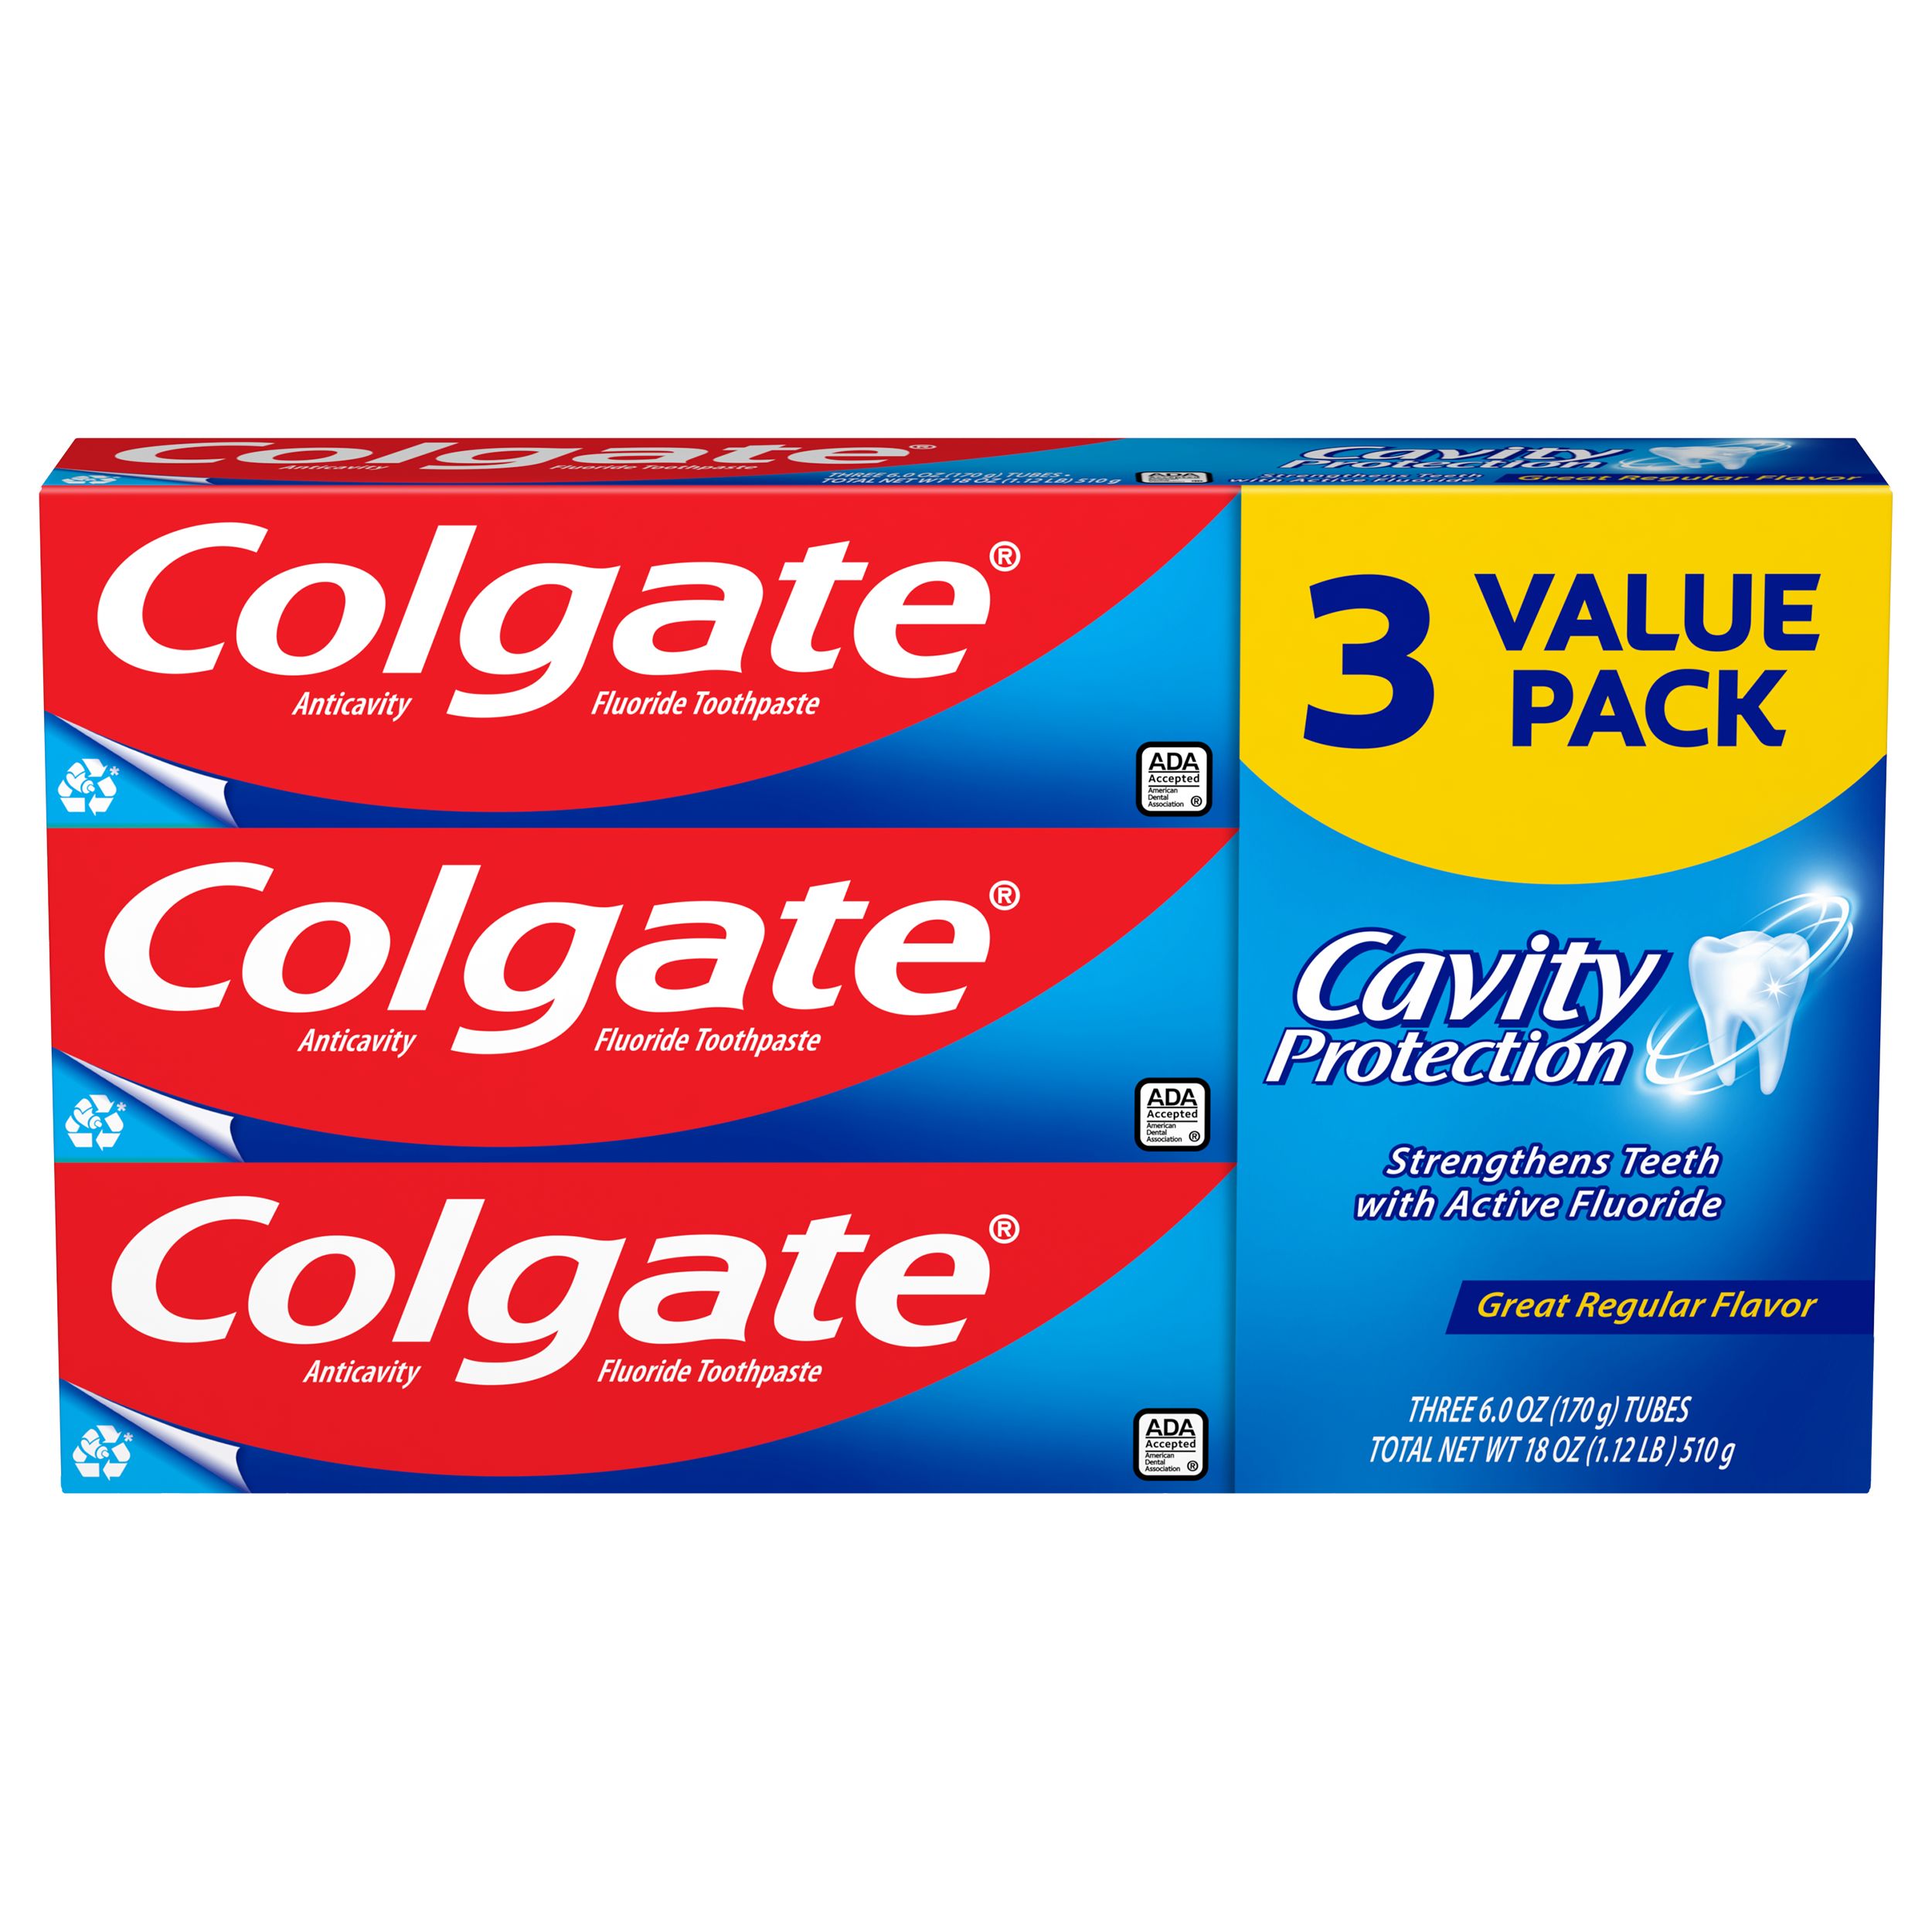 Colgate Cavity Protection Toothpaste, Great Regular Flavor, 6 Oz, 3 Pack - image 1 of 9